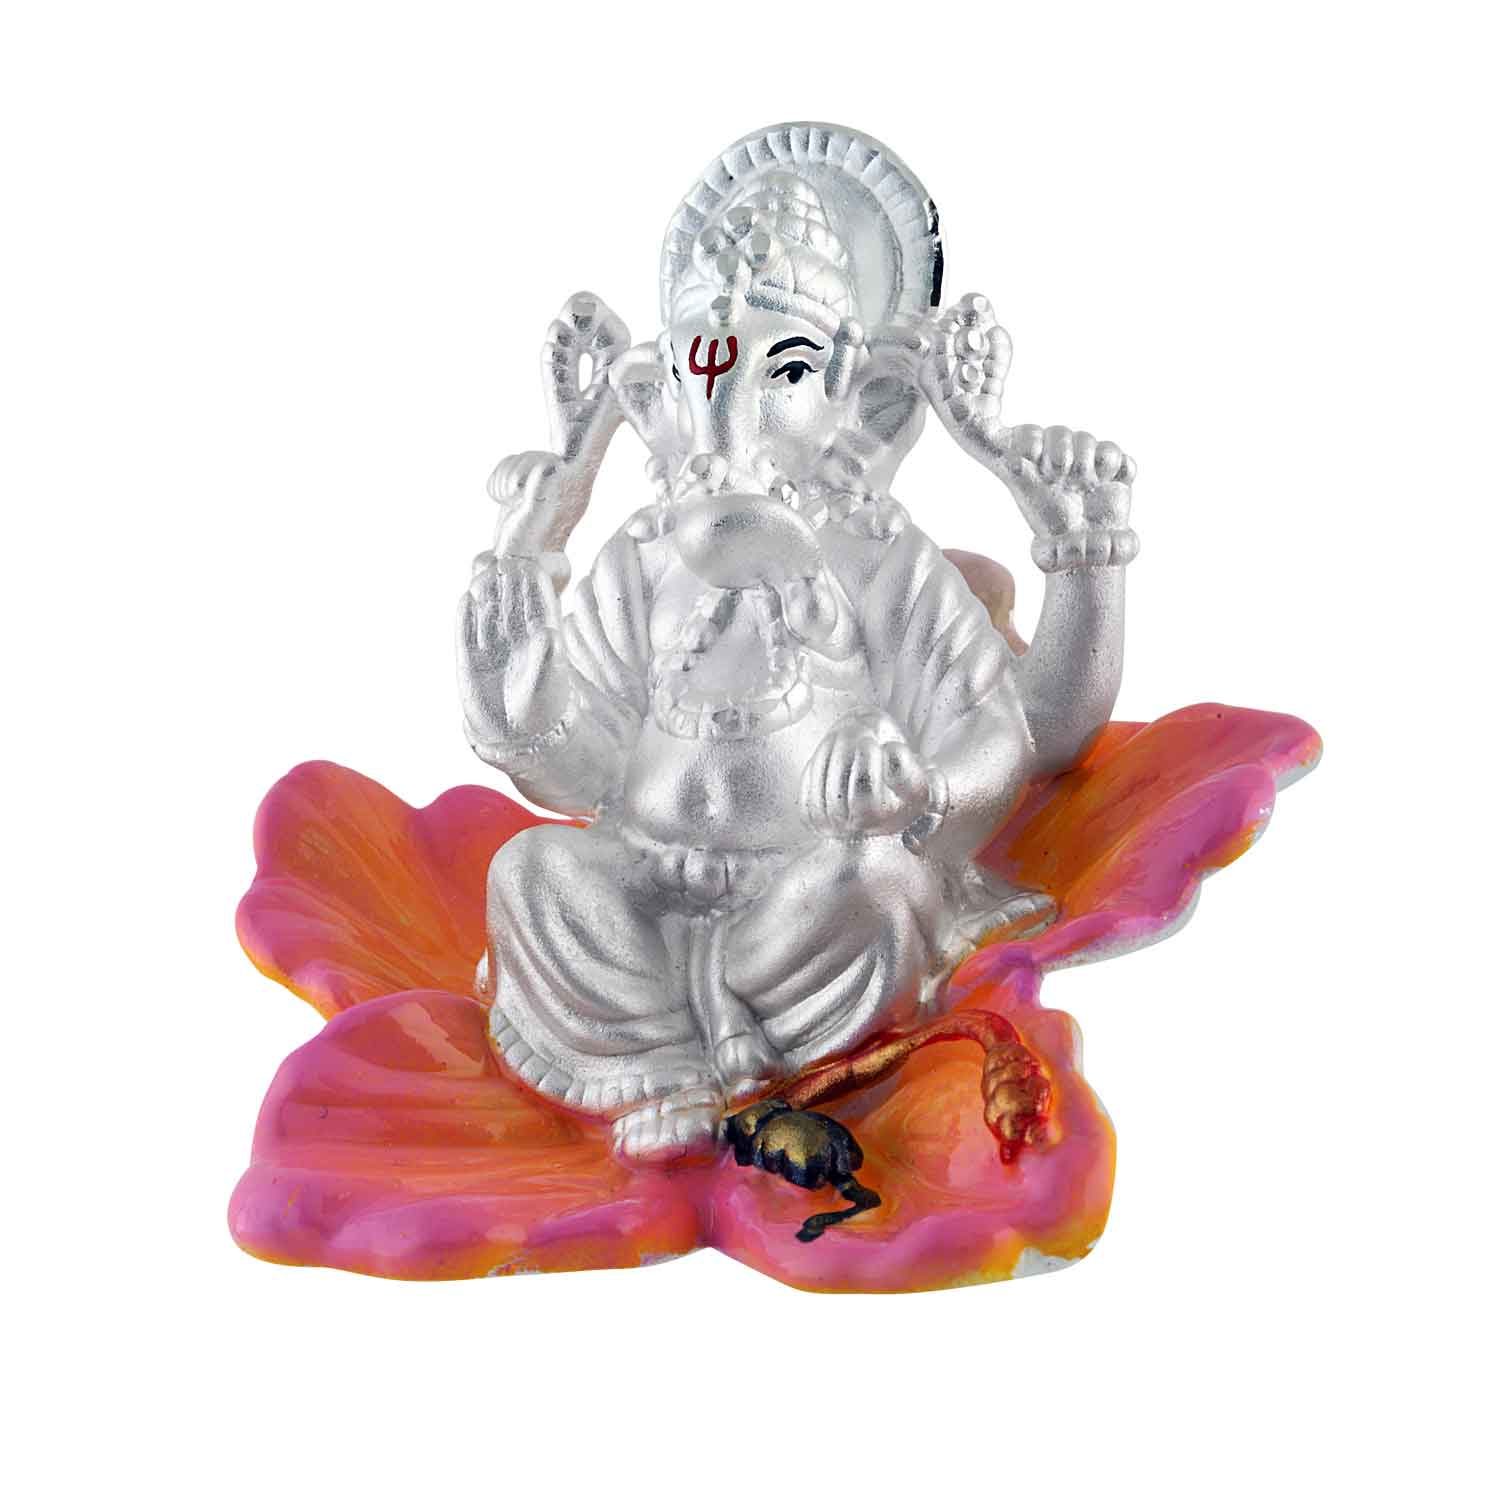 Buy Shivrekar Pagadi Ganesh Idol - 15 Inches, Pune Online at the Best Price  in India - Loopify